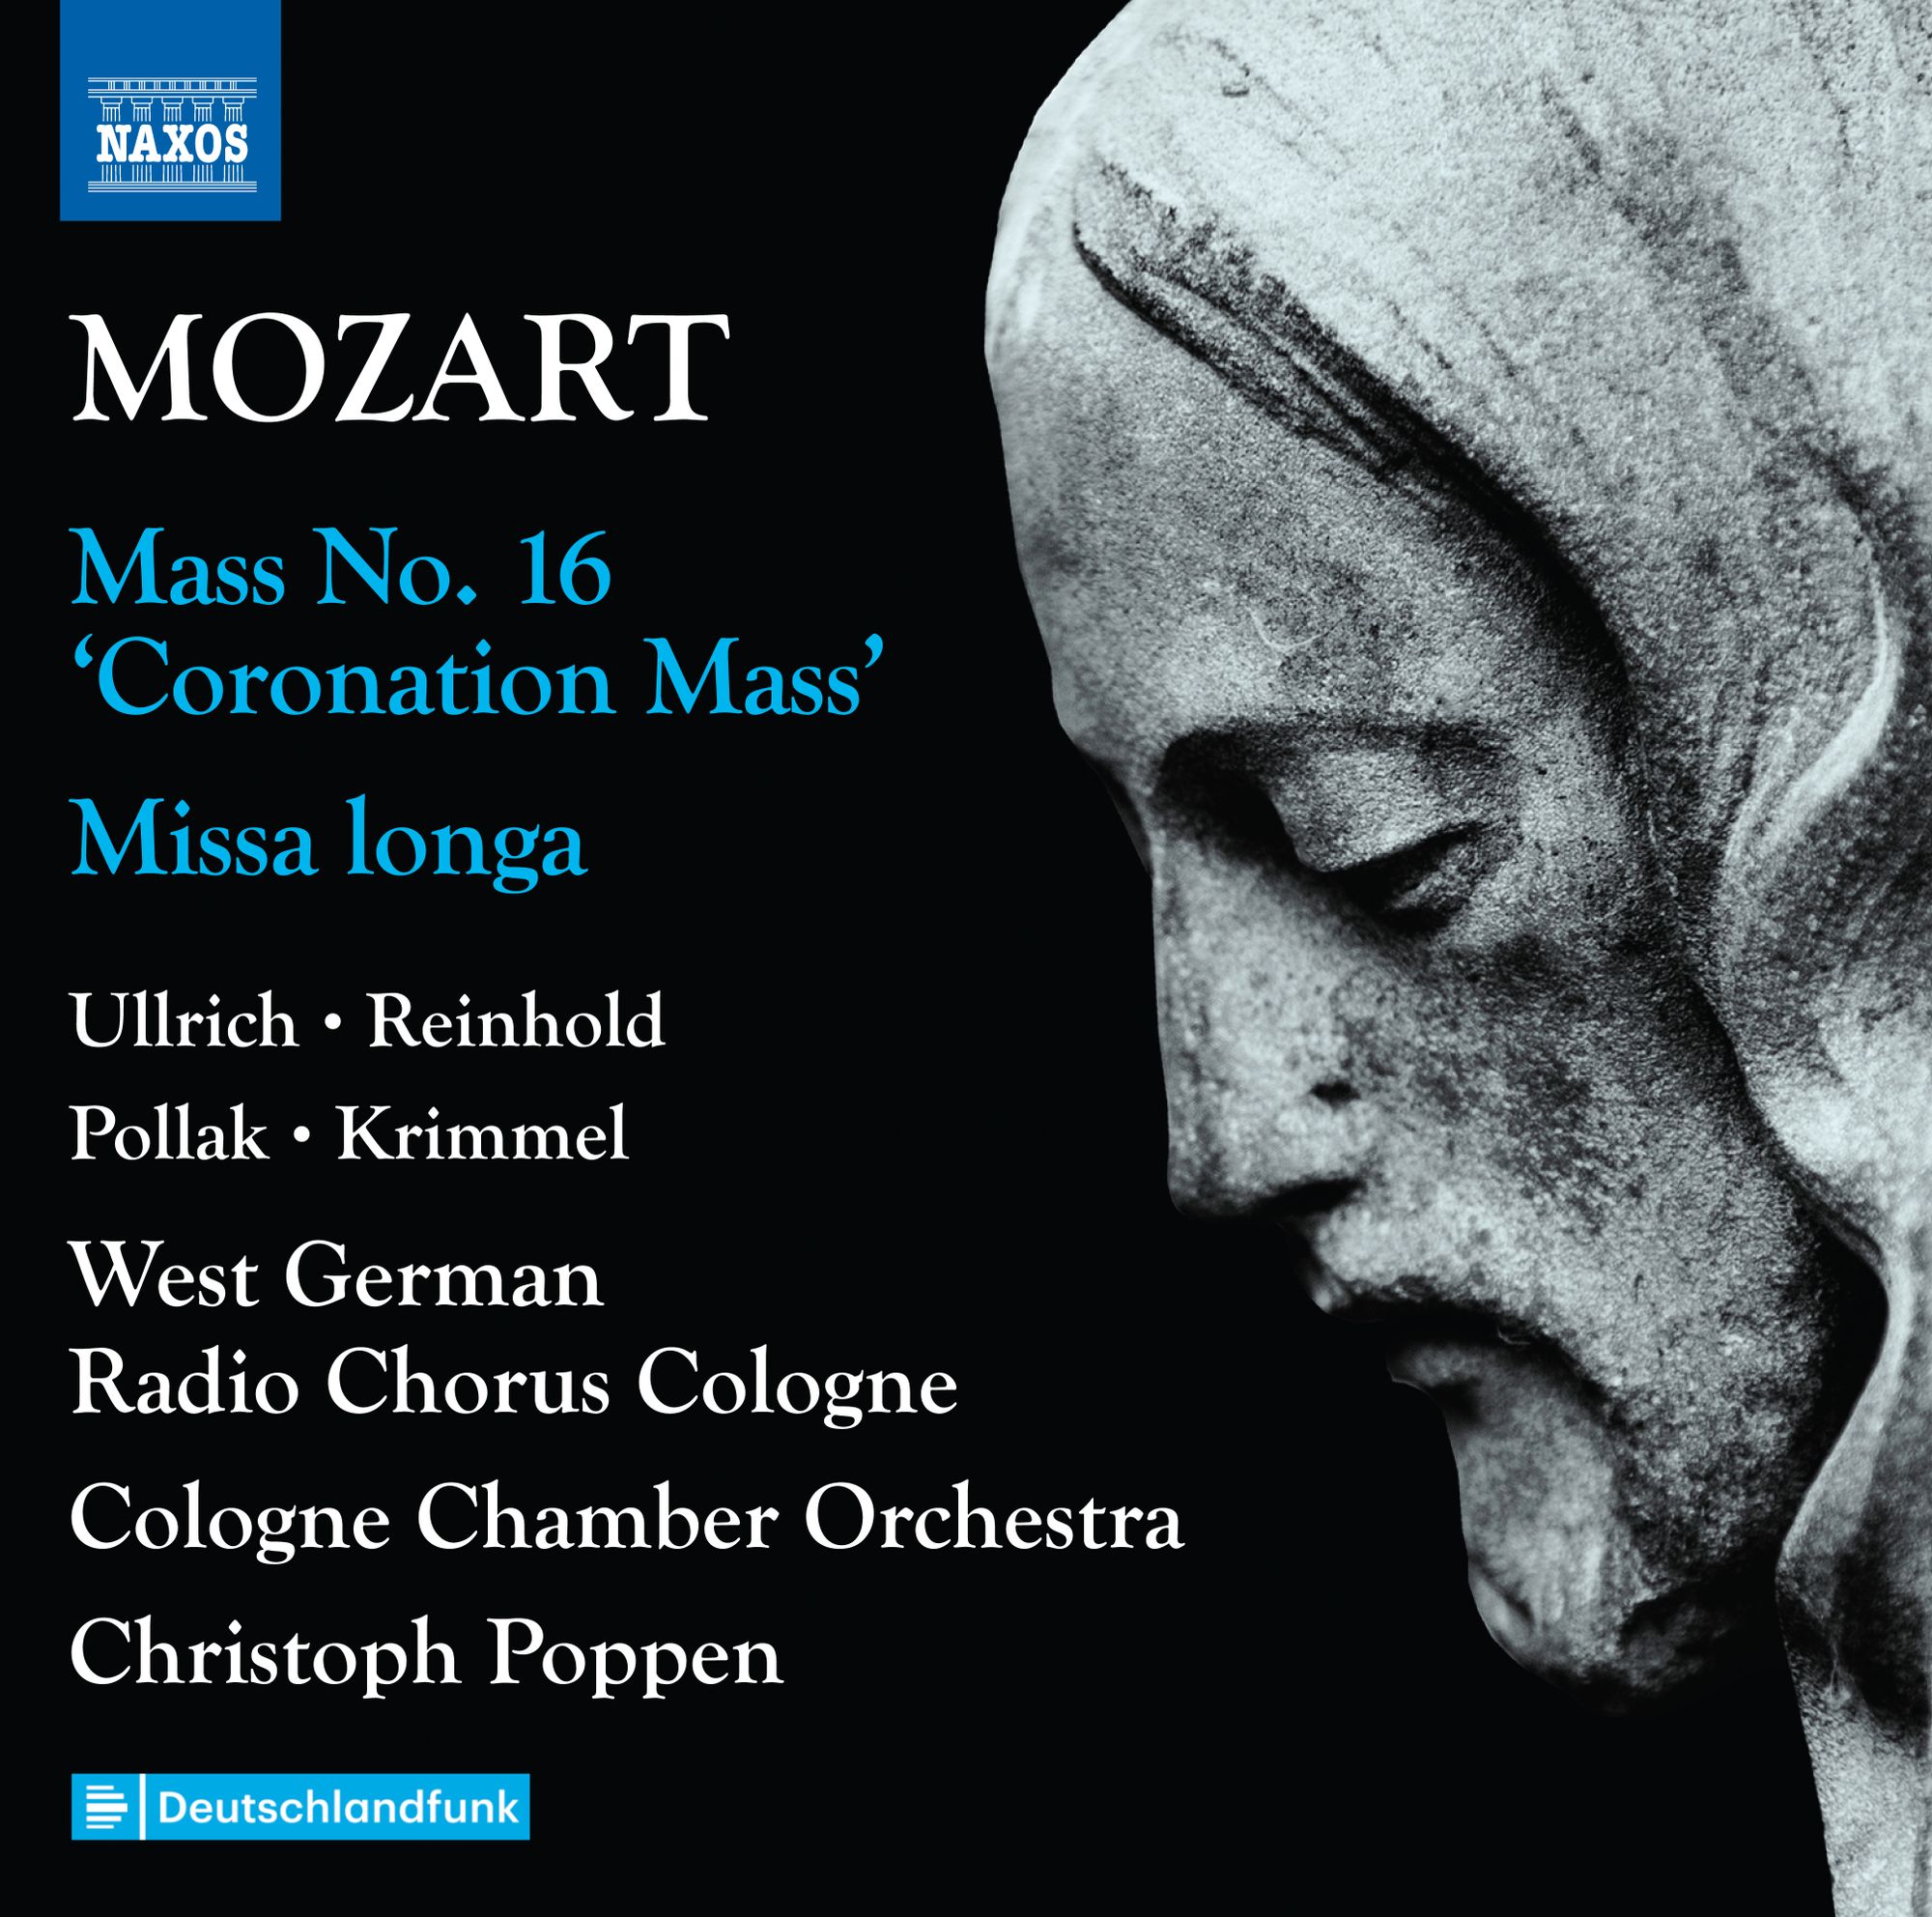 Mozart Masses: a new cycle begins from Christoph Poppen